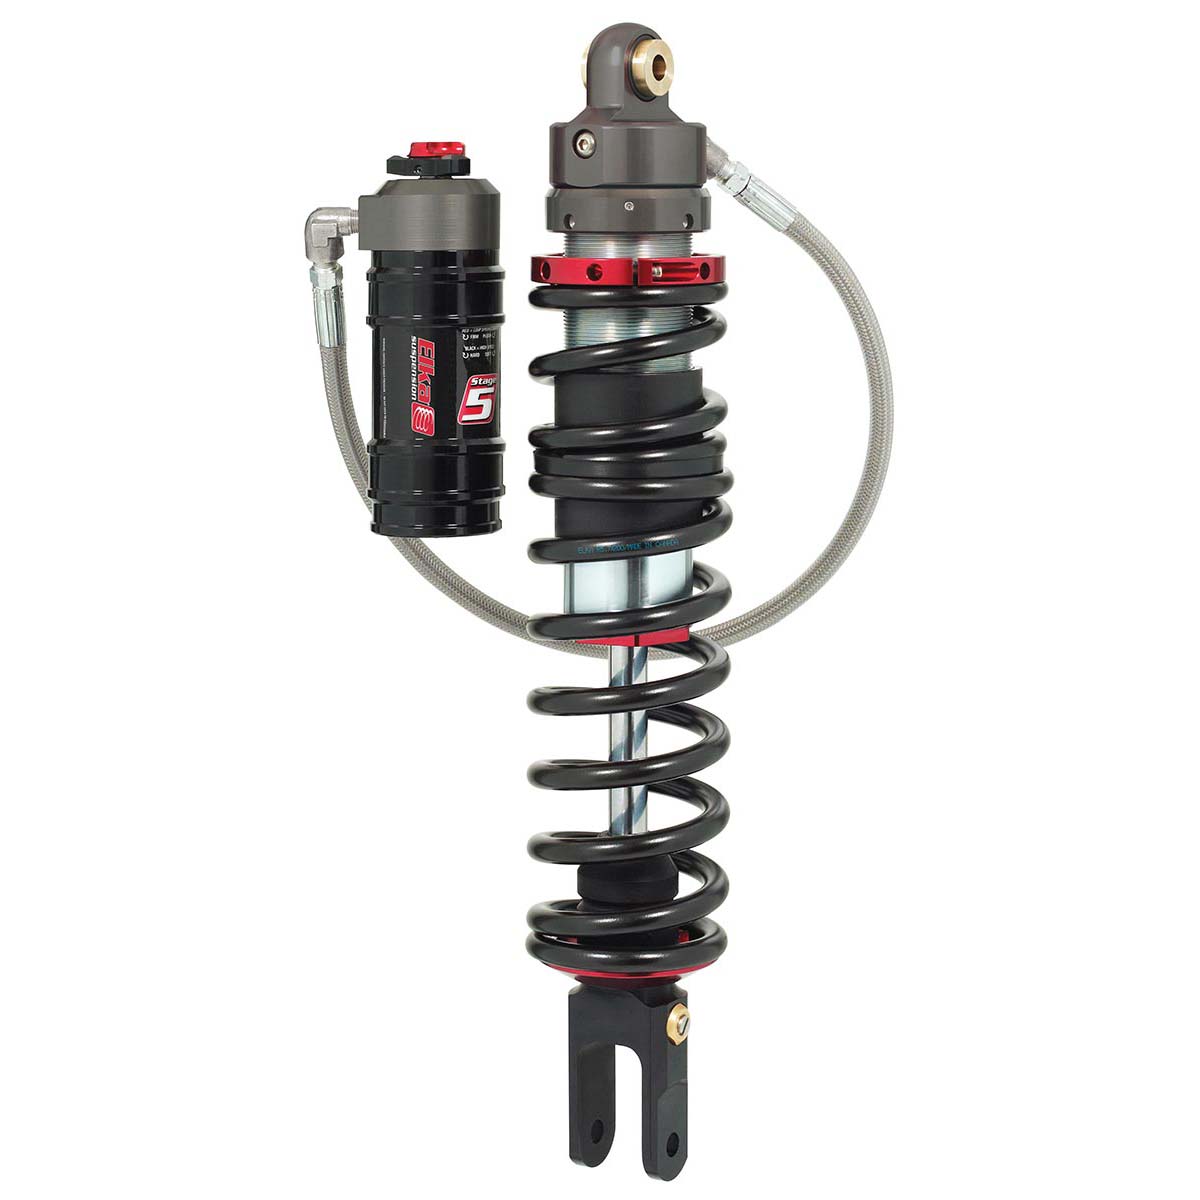 Details about   RED STAGE 3 PERFORMANCE REAR SHOCK ABSORBER FOR YAMAHA RAPTOR 660R 700 700R ATV 